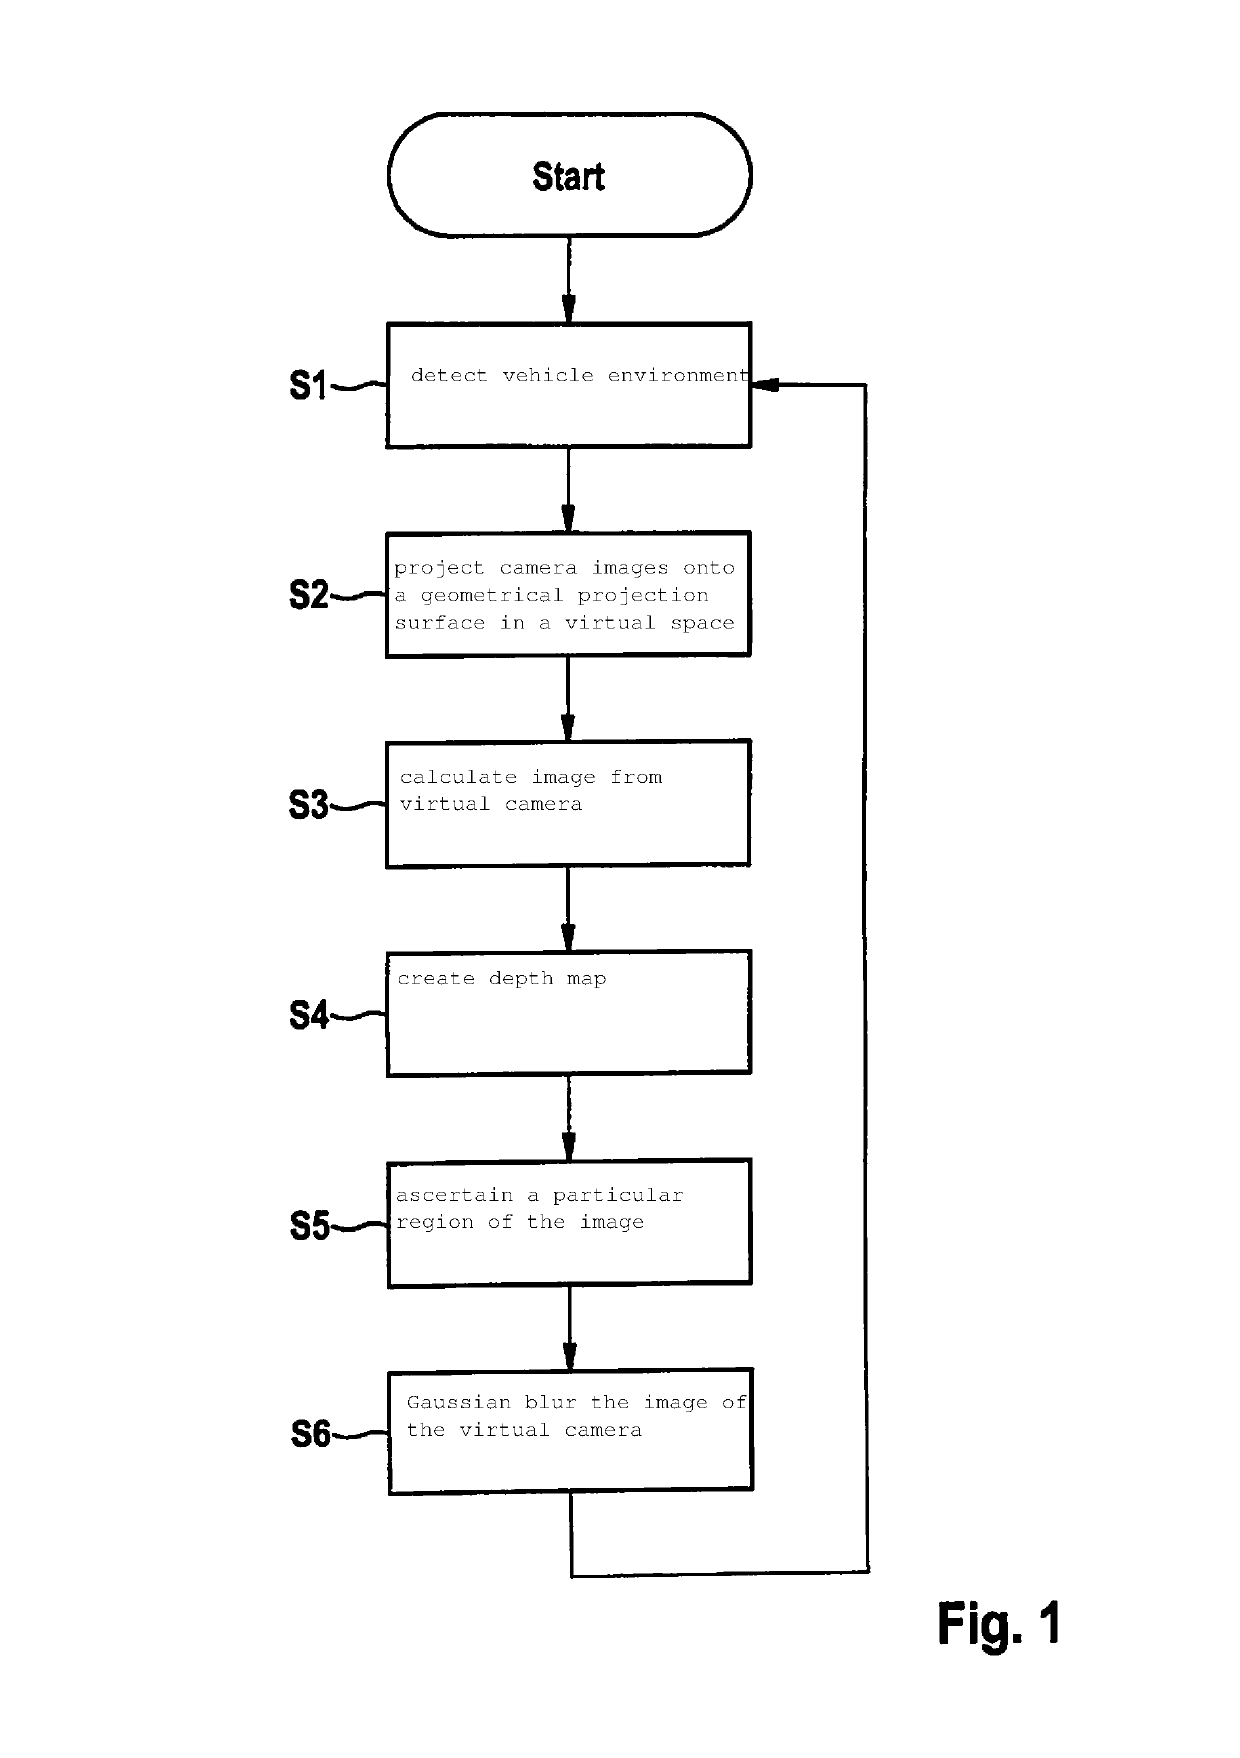 Method for displaying a vehicle environment of a vehicle